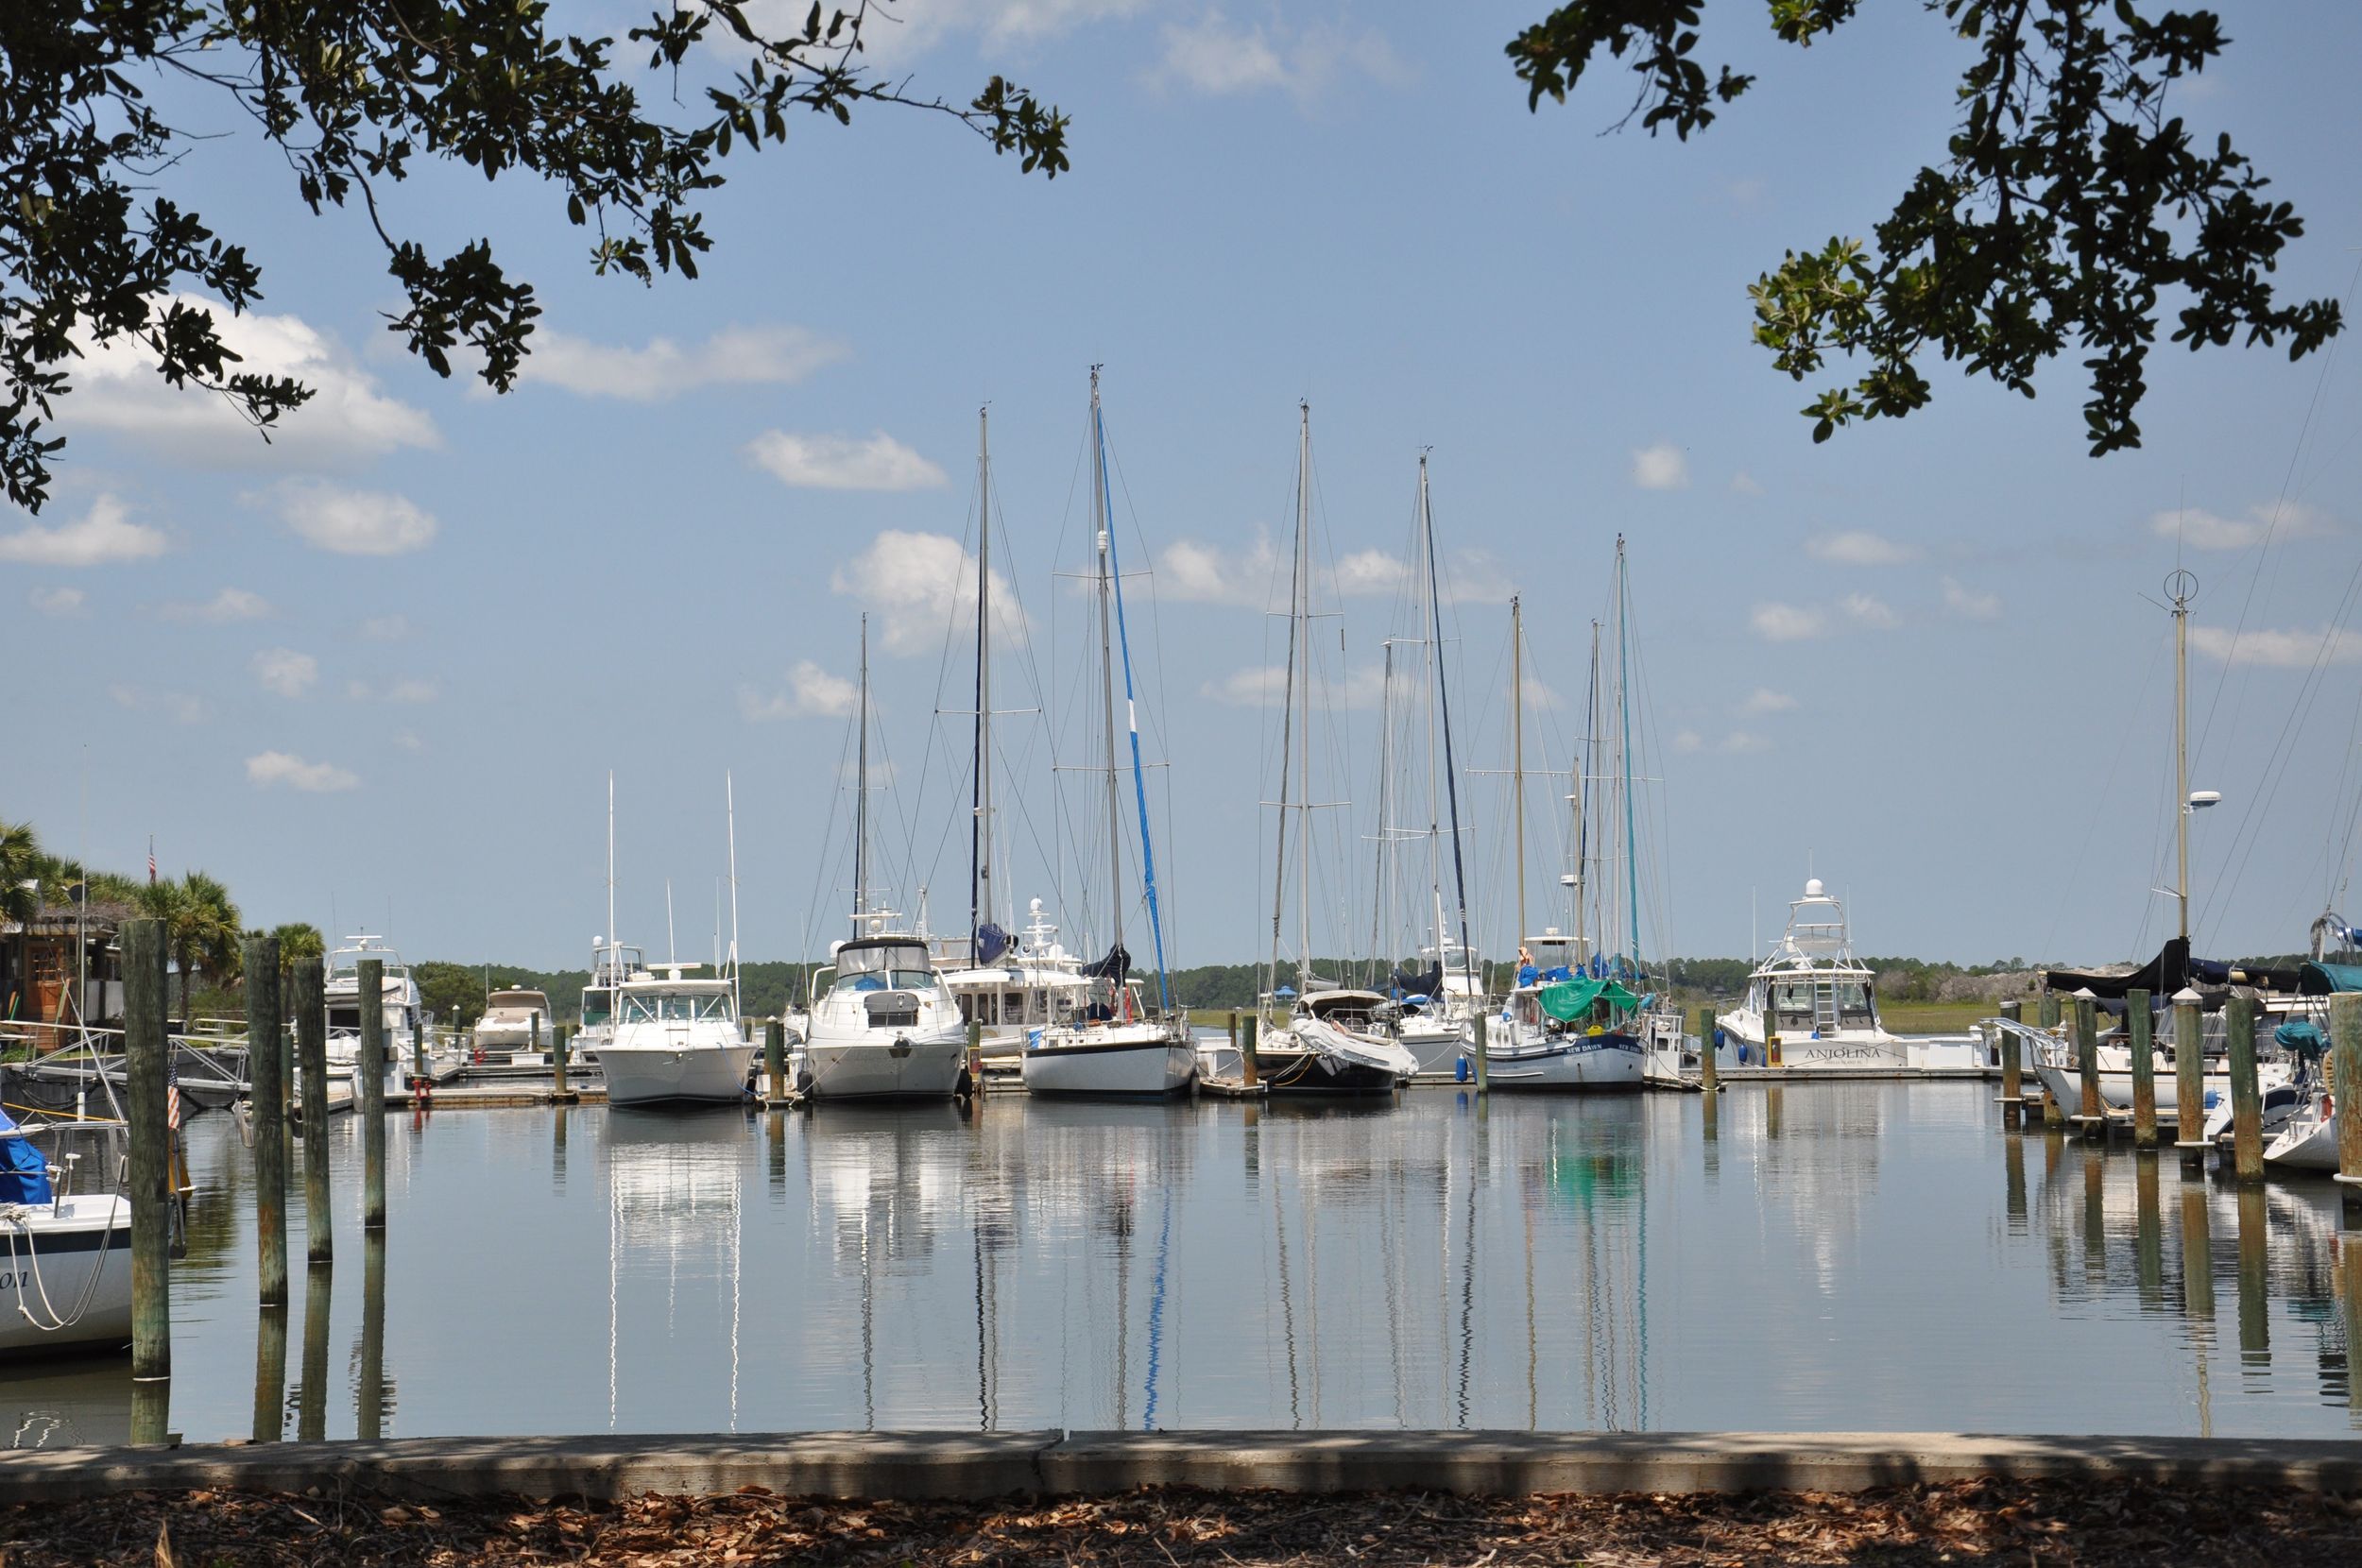 White sail boats parked in marina during the day.